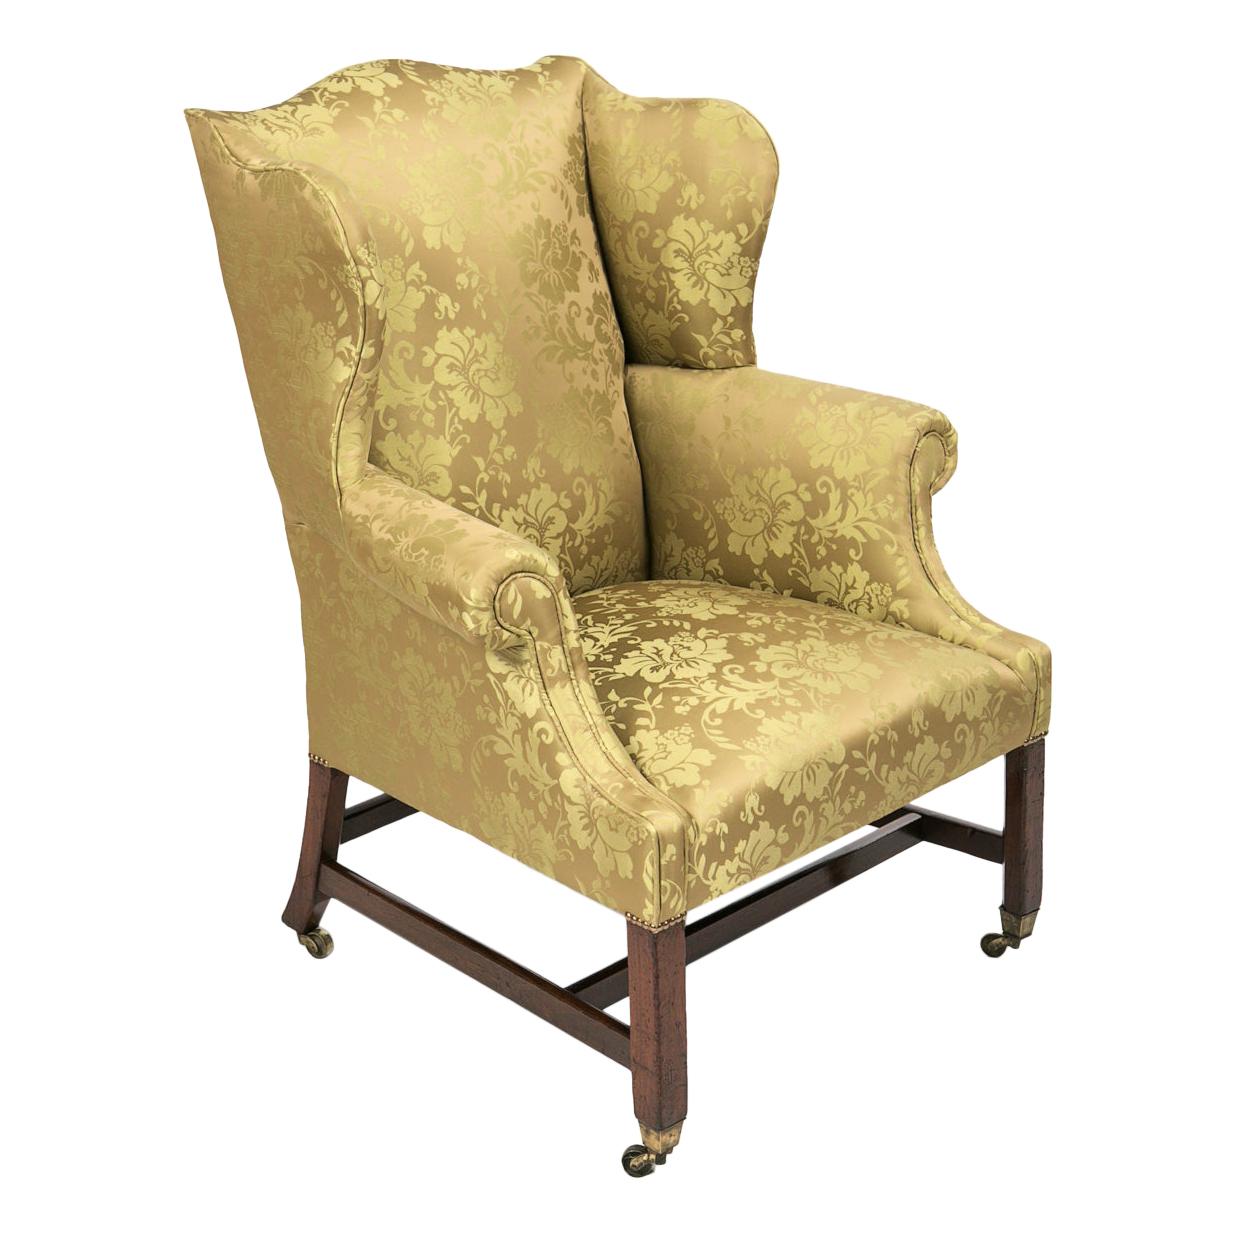 Early 19th Century George III Wing Chair For Sale